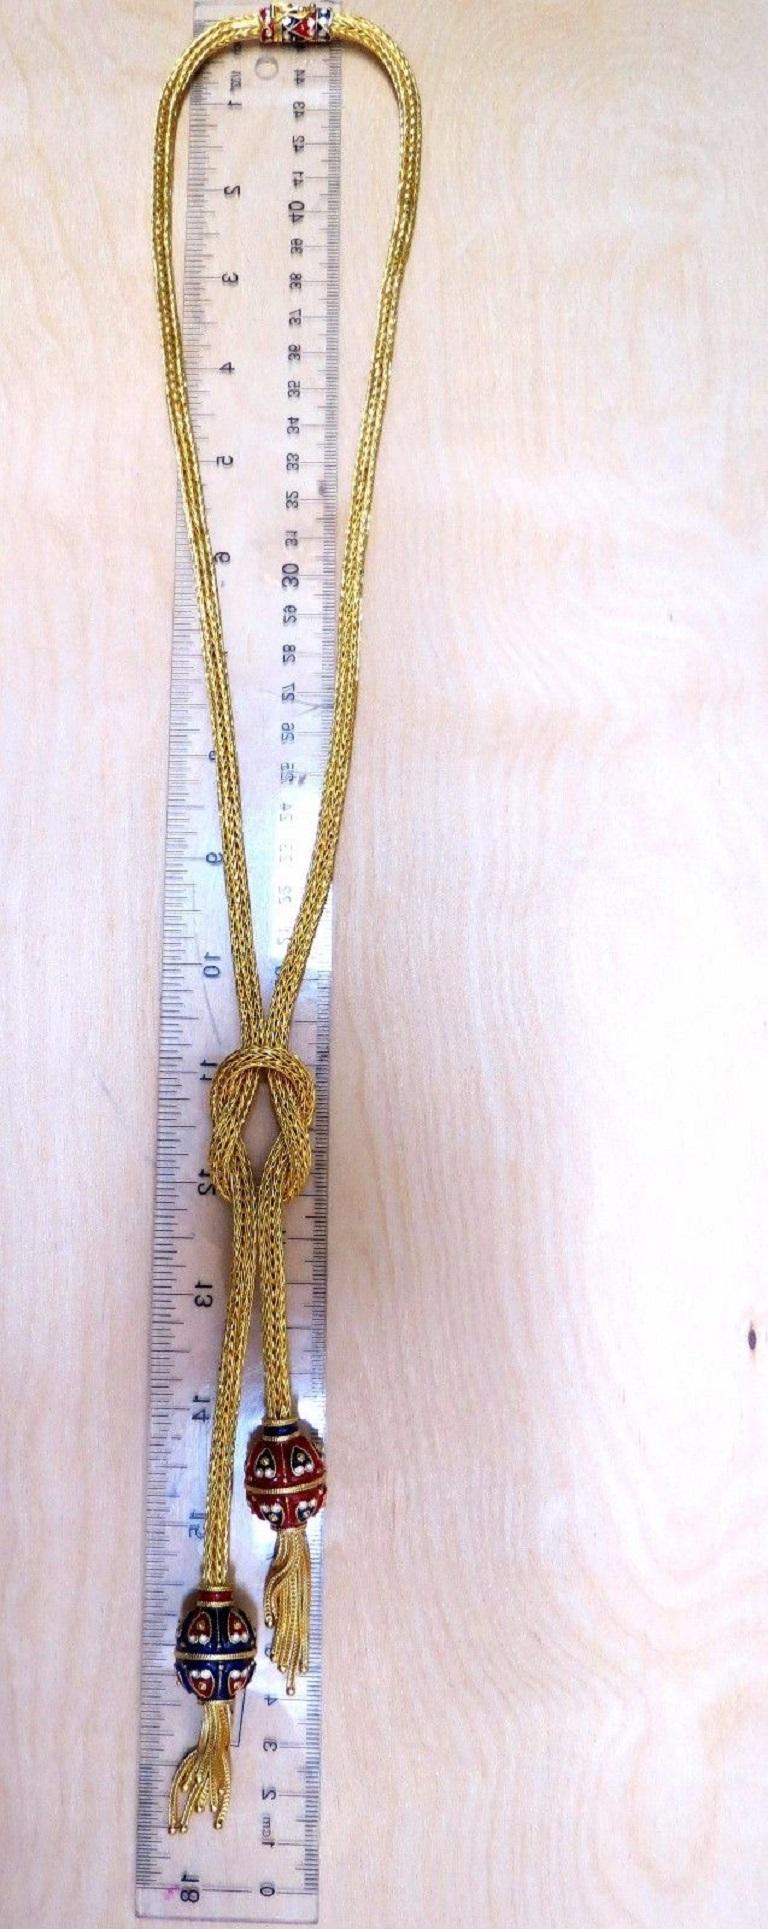 Sailor Knot Tight Endless Long Bolo Tassel Necklace

Intricate Intertwined Detail

Necklace:

24 Inches (wearable length)

6.25 inches center bolo dangle

Gorgeous enamel details.

18 X 24mm each enamel ball measurement (2).

18kt. yellow gold 

132